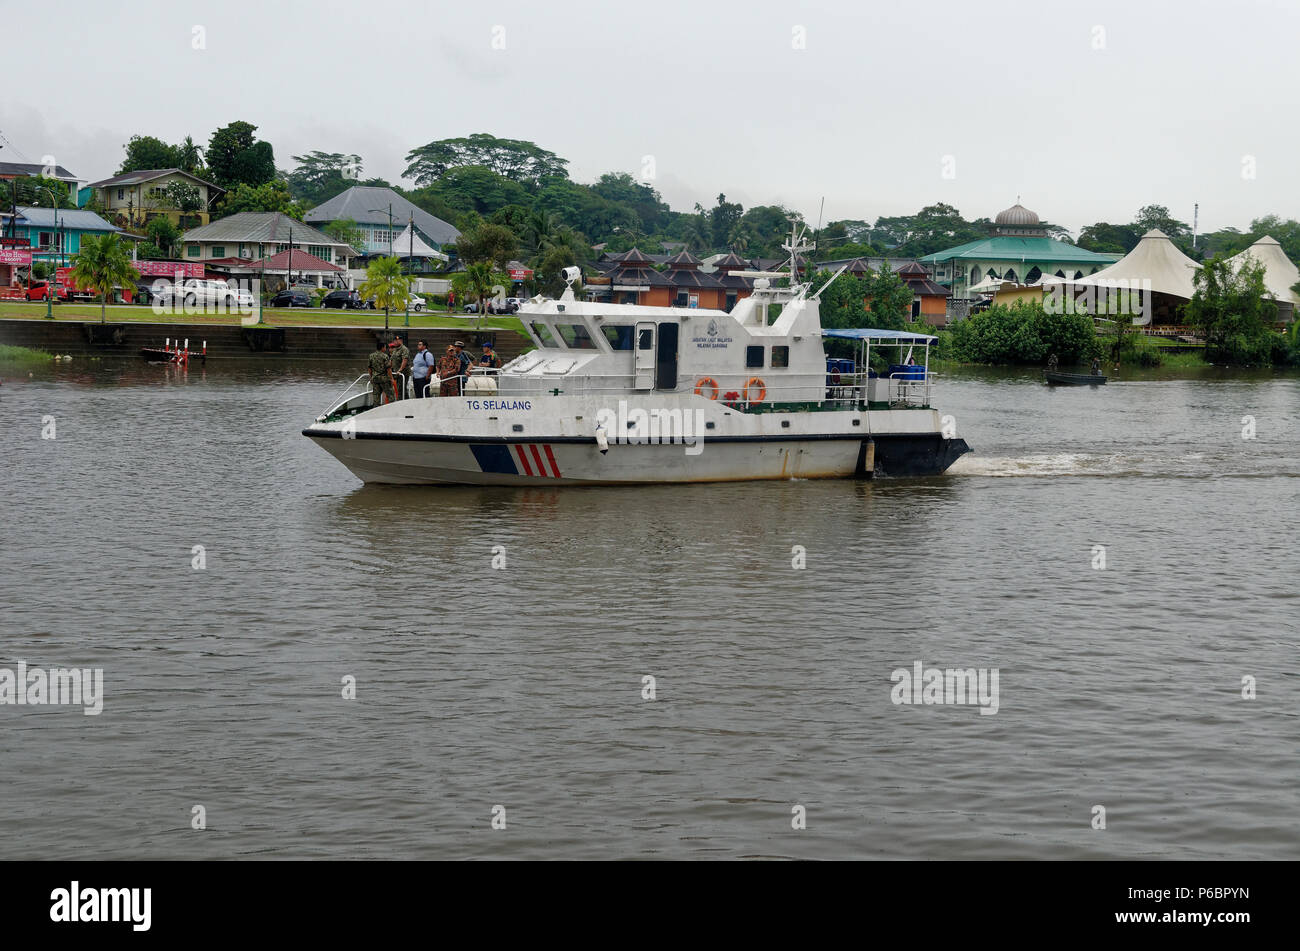 River police boat on the Sarawak River in preparation for the Gawai Parade, Kuching, Malaysia, Borneo Stock Photo